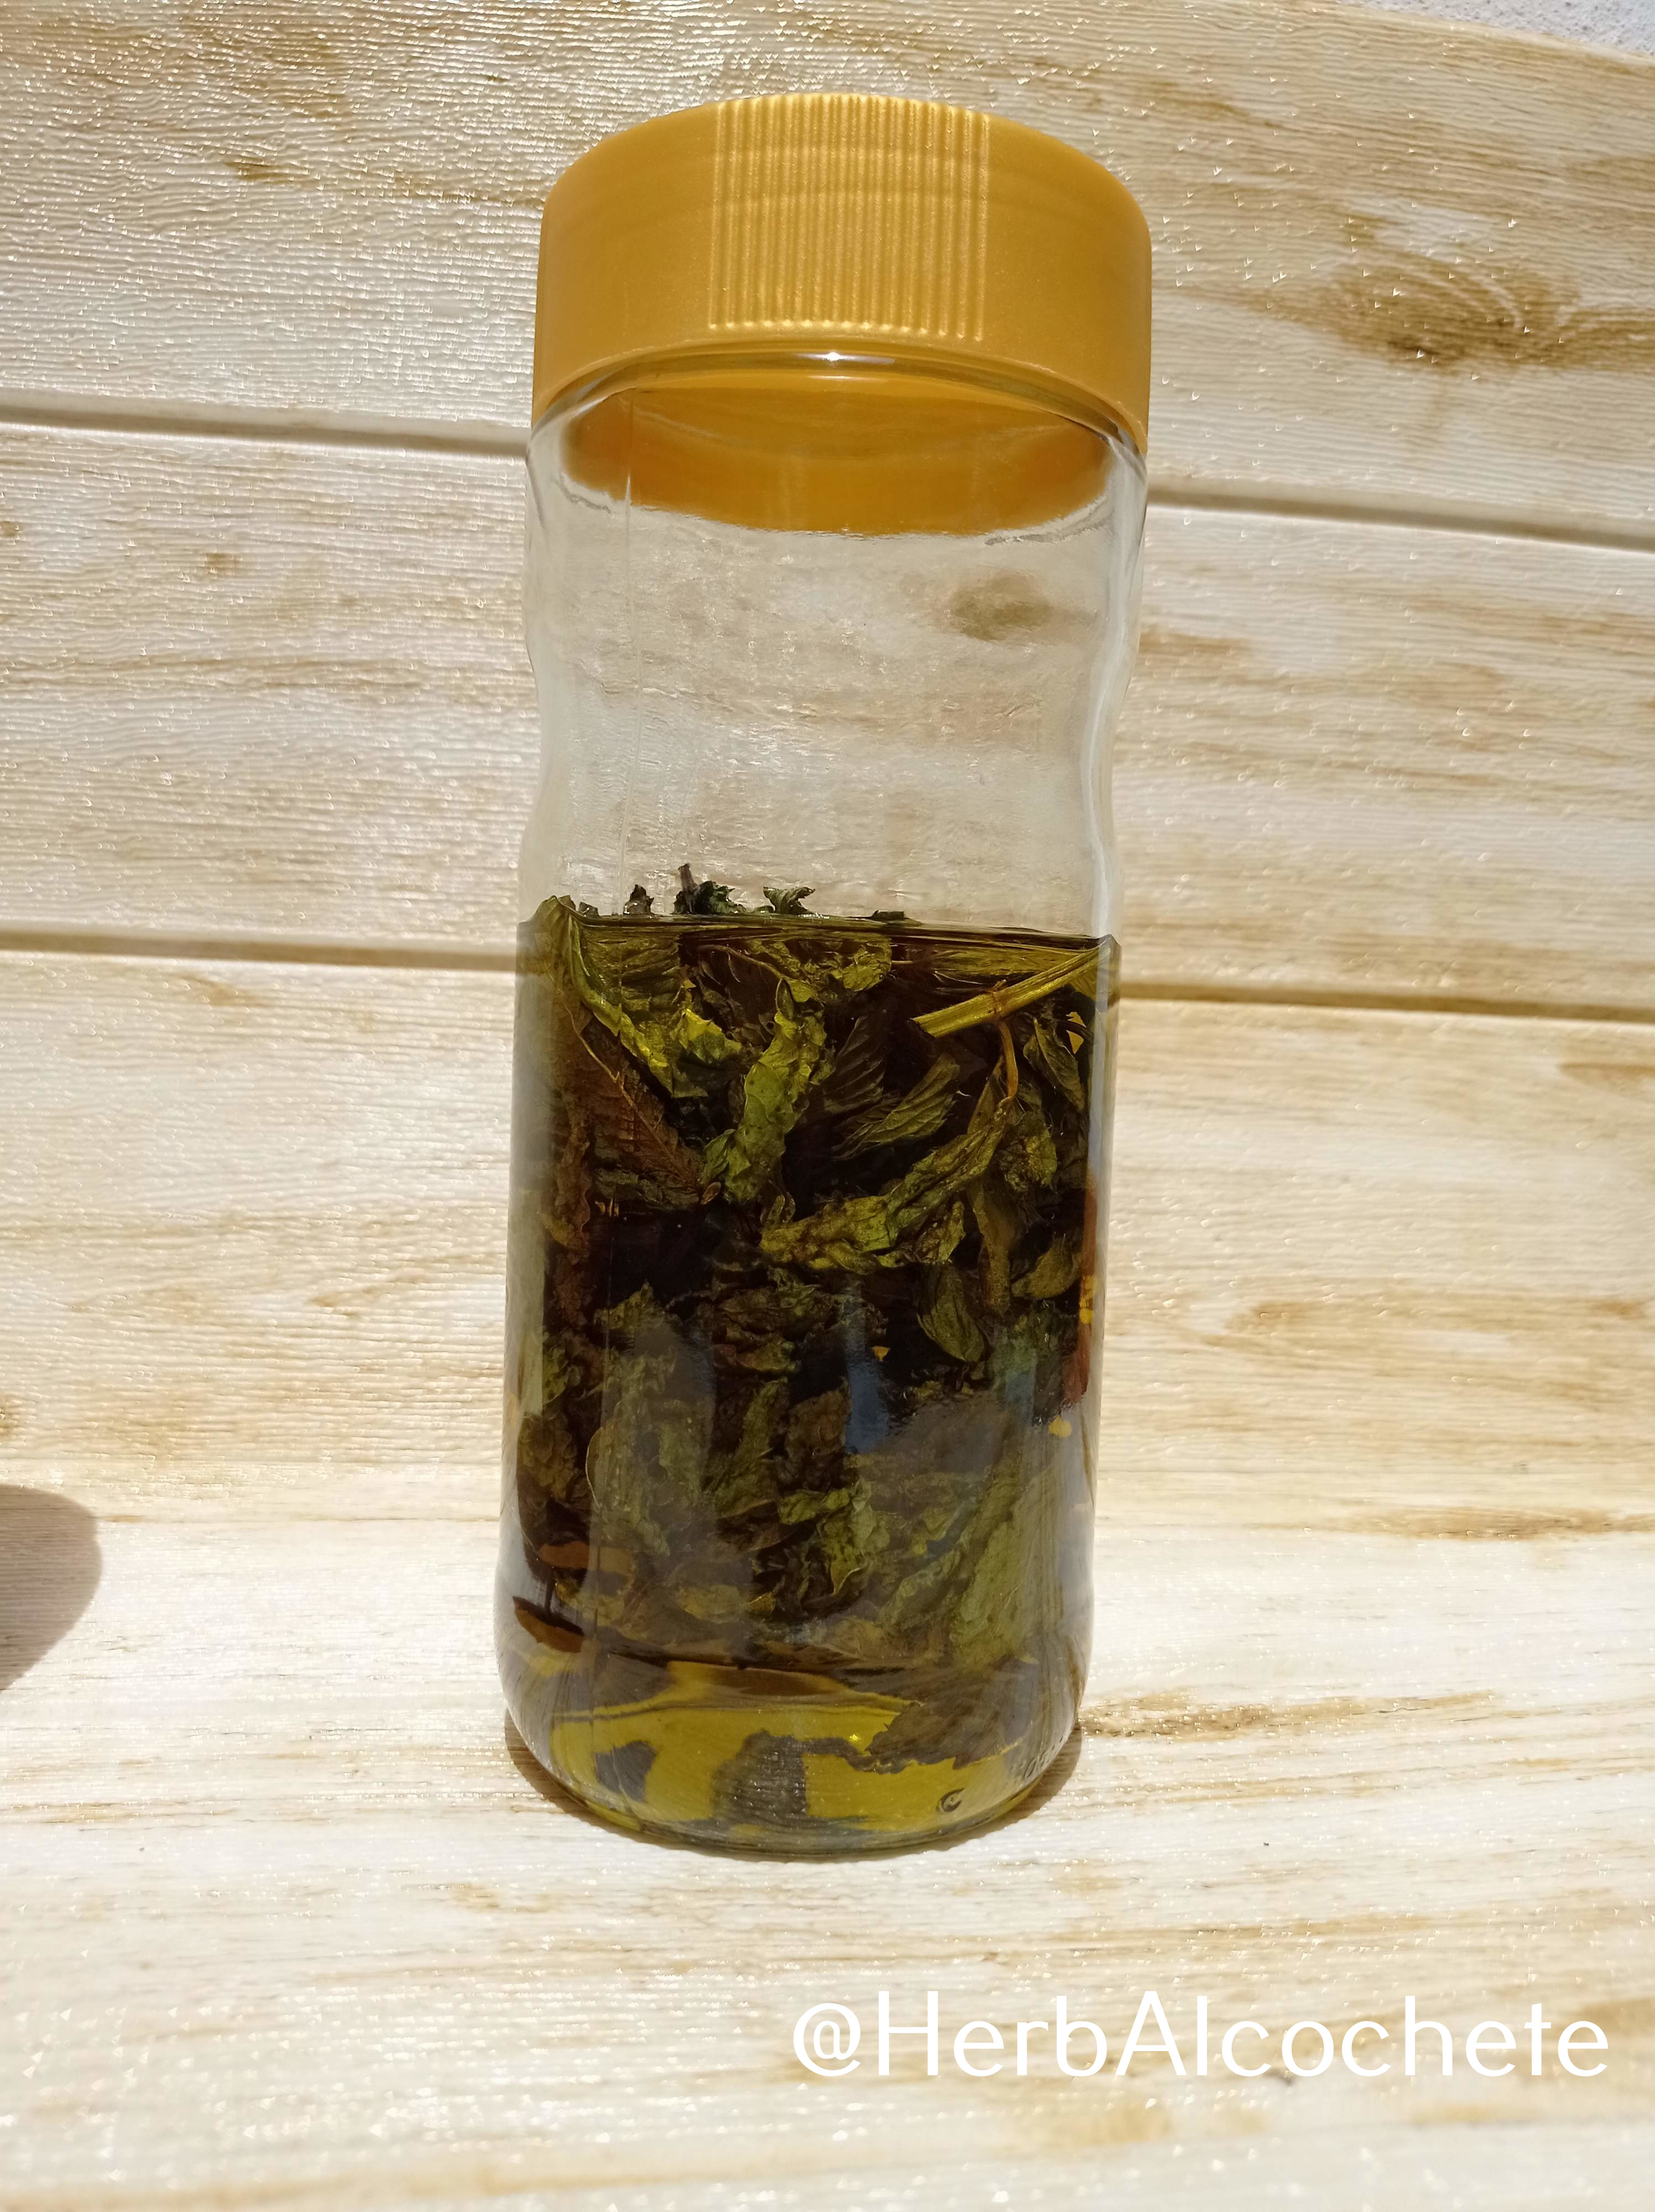 How to Make Infused Oil With Dried Herbs